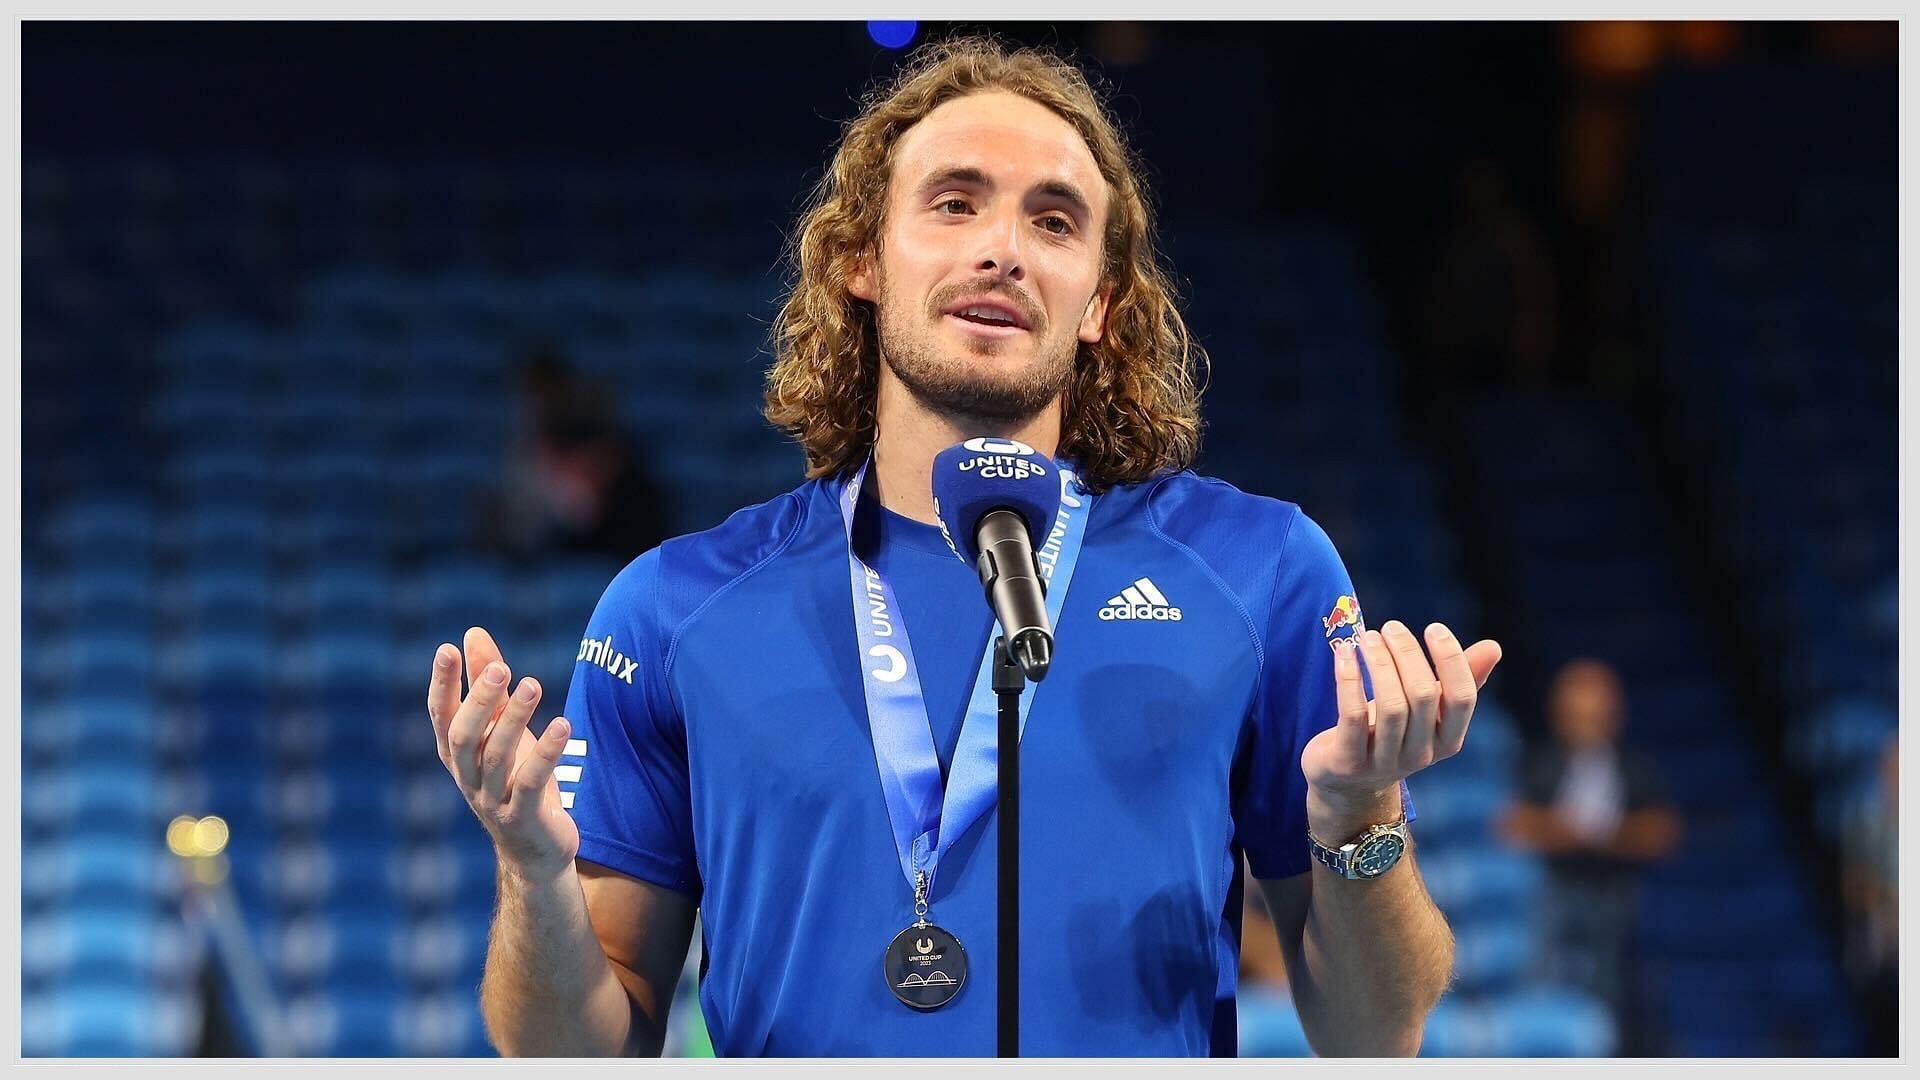 Stefanos Tsitsipas will donate $1,000 for every ace he hits in Acapulco this year.